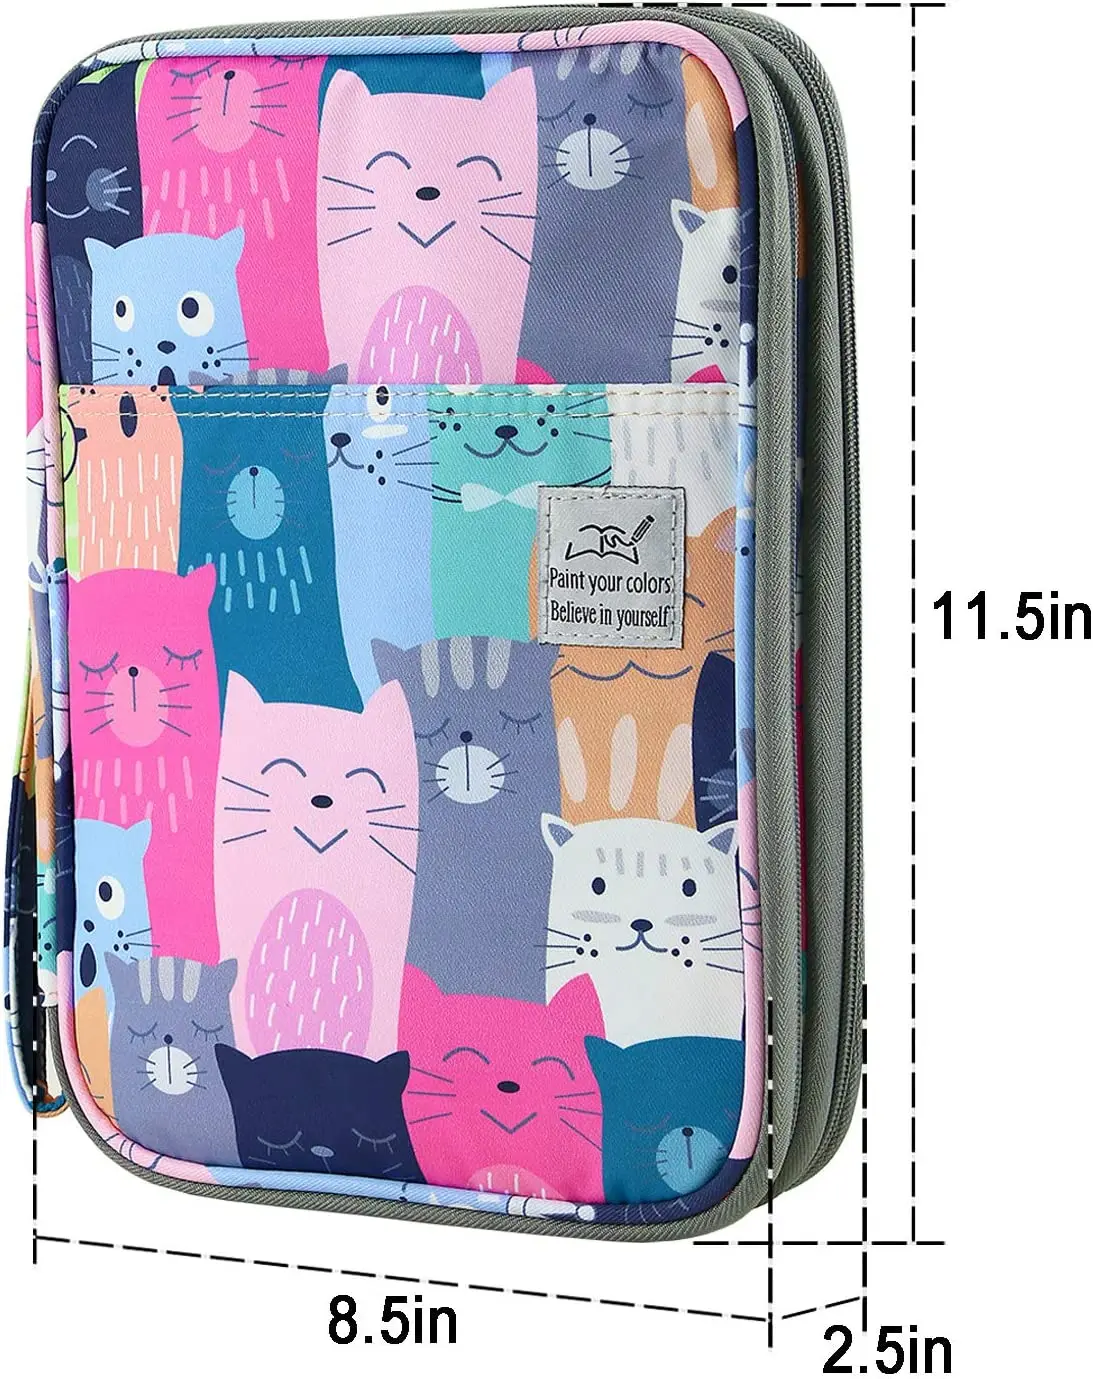 https://ae01.alicdn.com/kf/S7903dc79a997436ebd3d34852c0008f7J/Colored-Pencil-Case-for-Student-Artist-96-192-slots-Large-Capacity-Pencil-Holder-with-Zipper-for.jpg